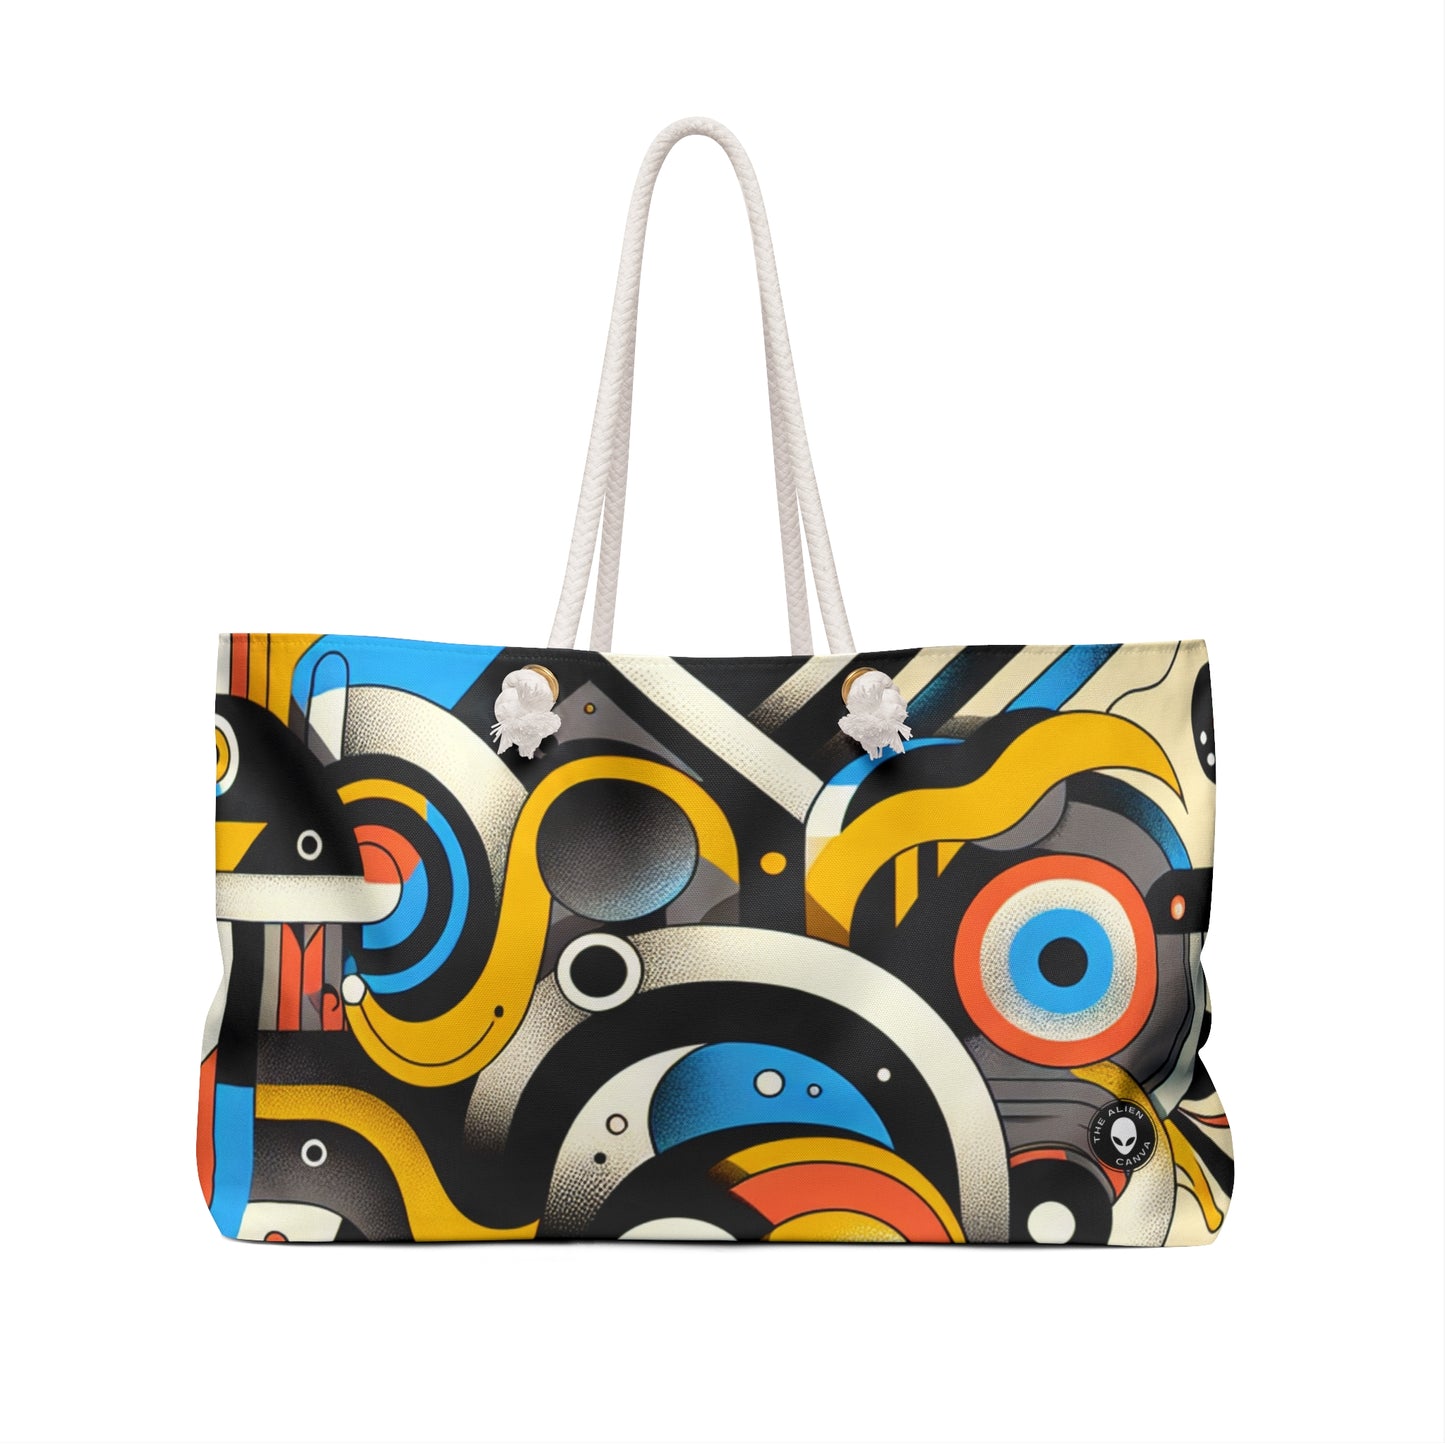 "Dada Fusion: A Whimsical Chaos of Everyday Objects" - The Alien Weekender Bag Neo-Dada